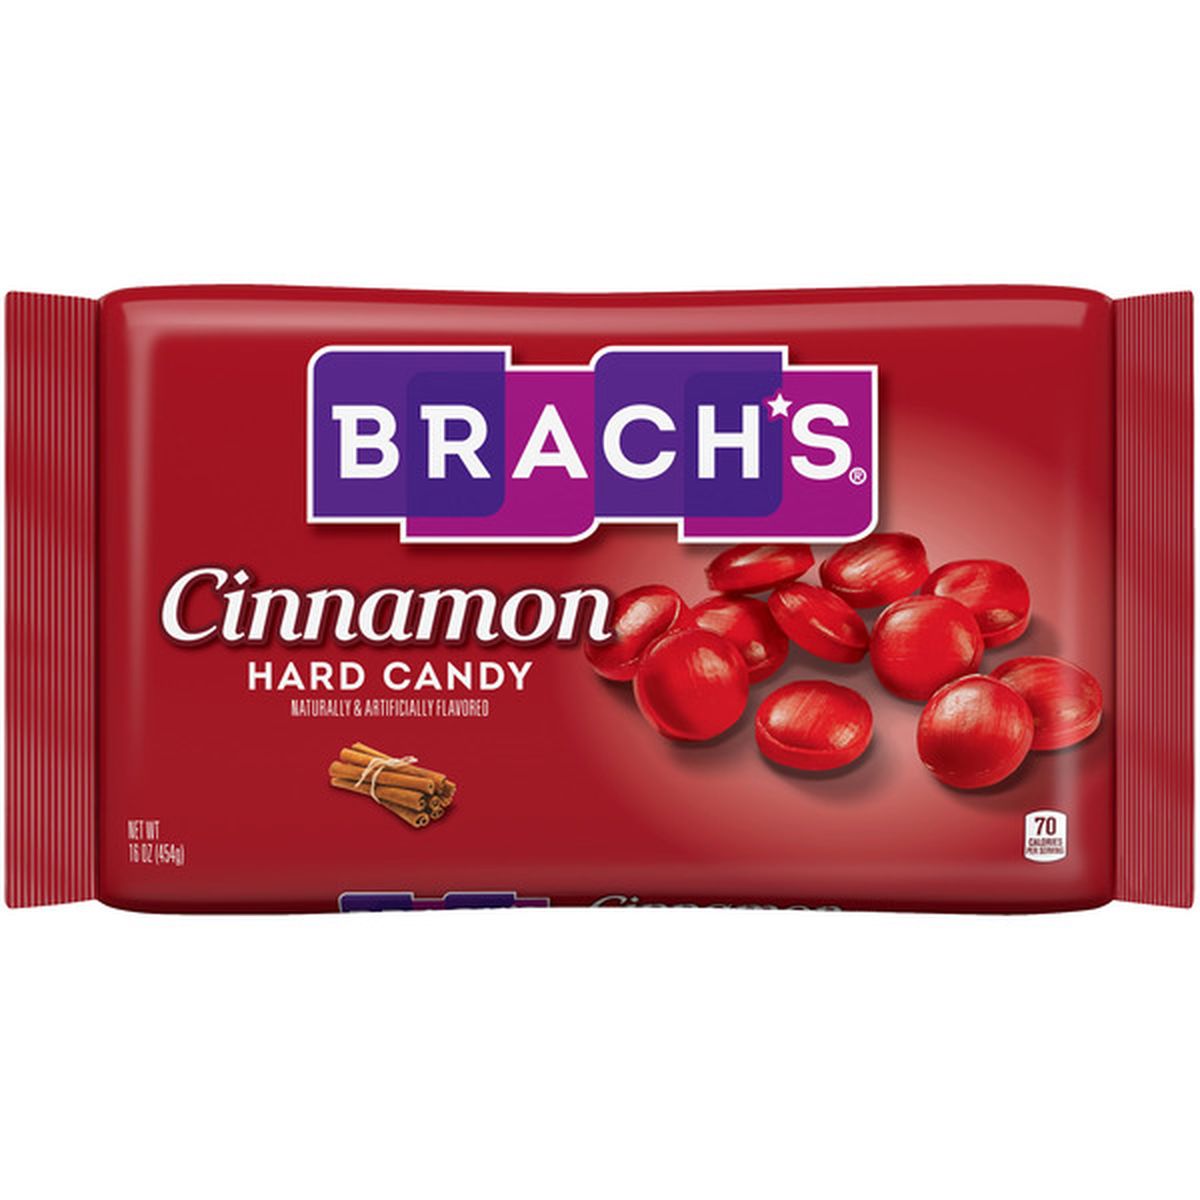 Brach's Cinnamon Hard Candy (16 oz) Delivery or Pickup Near Me